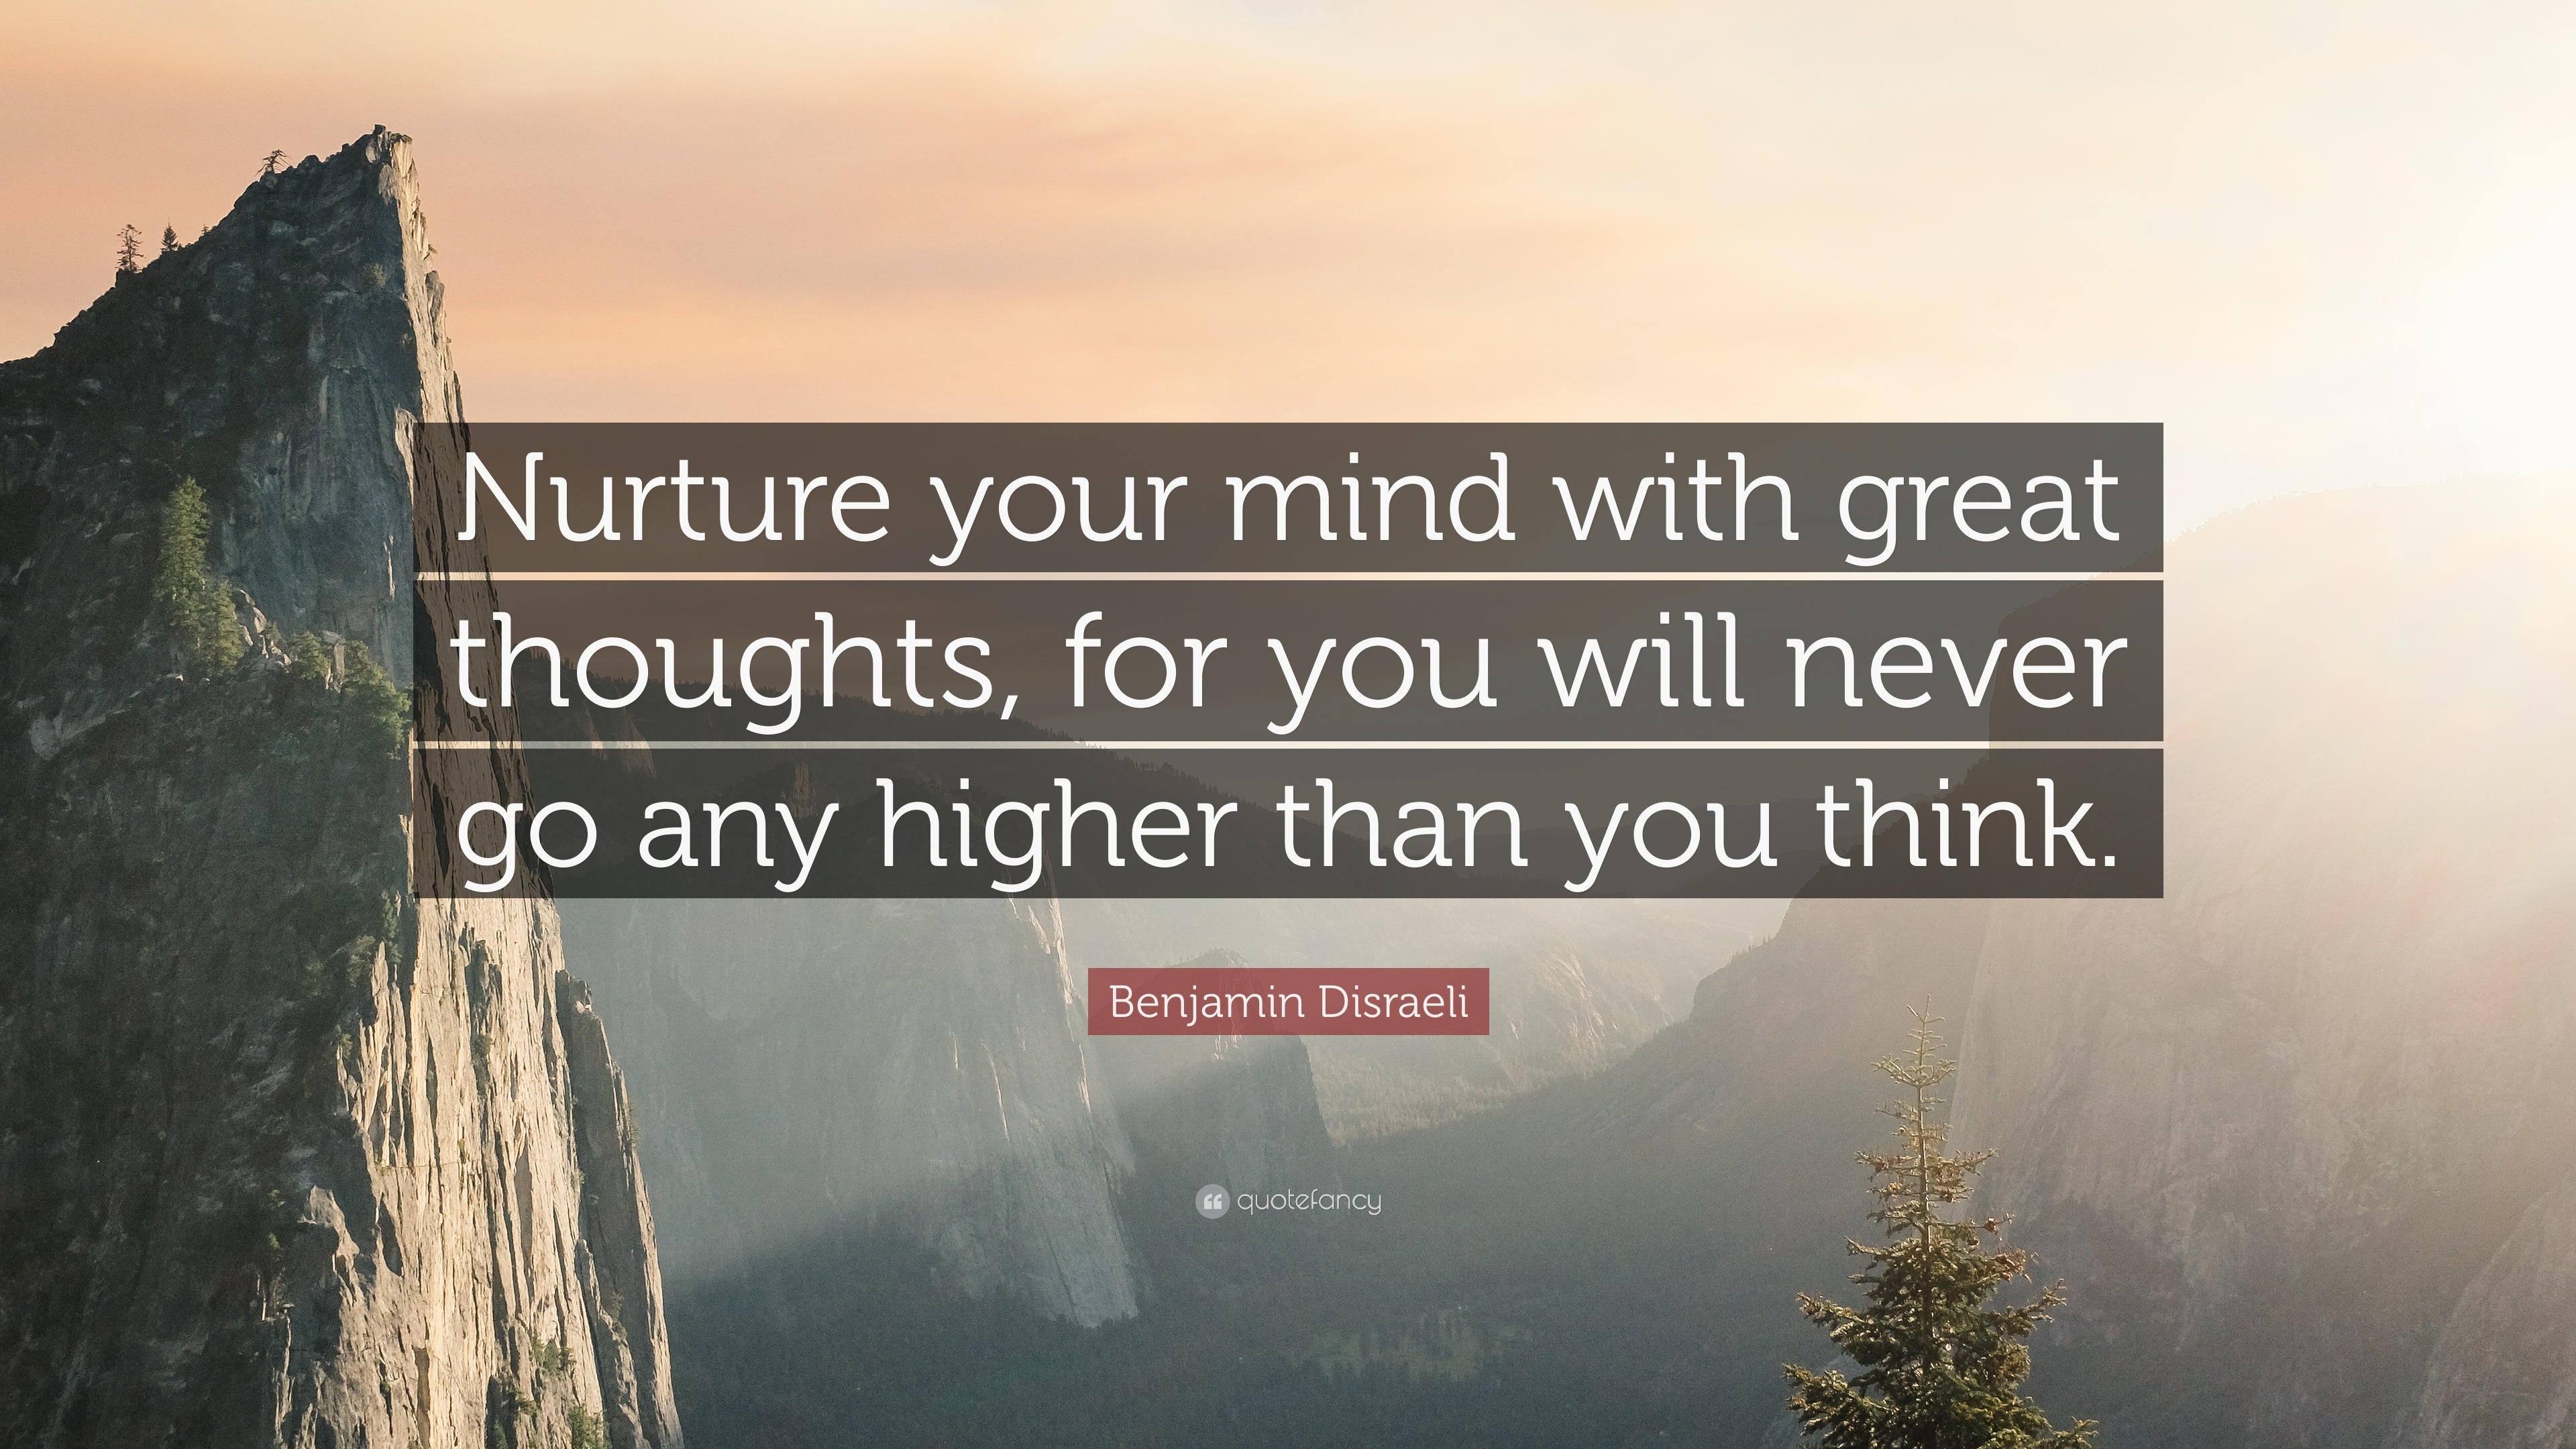 Benjamin Disraeli Quote: “Nurture your mind with great thoughts, for